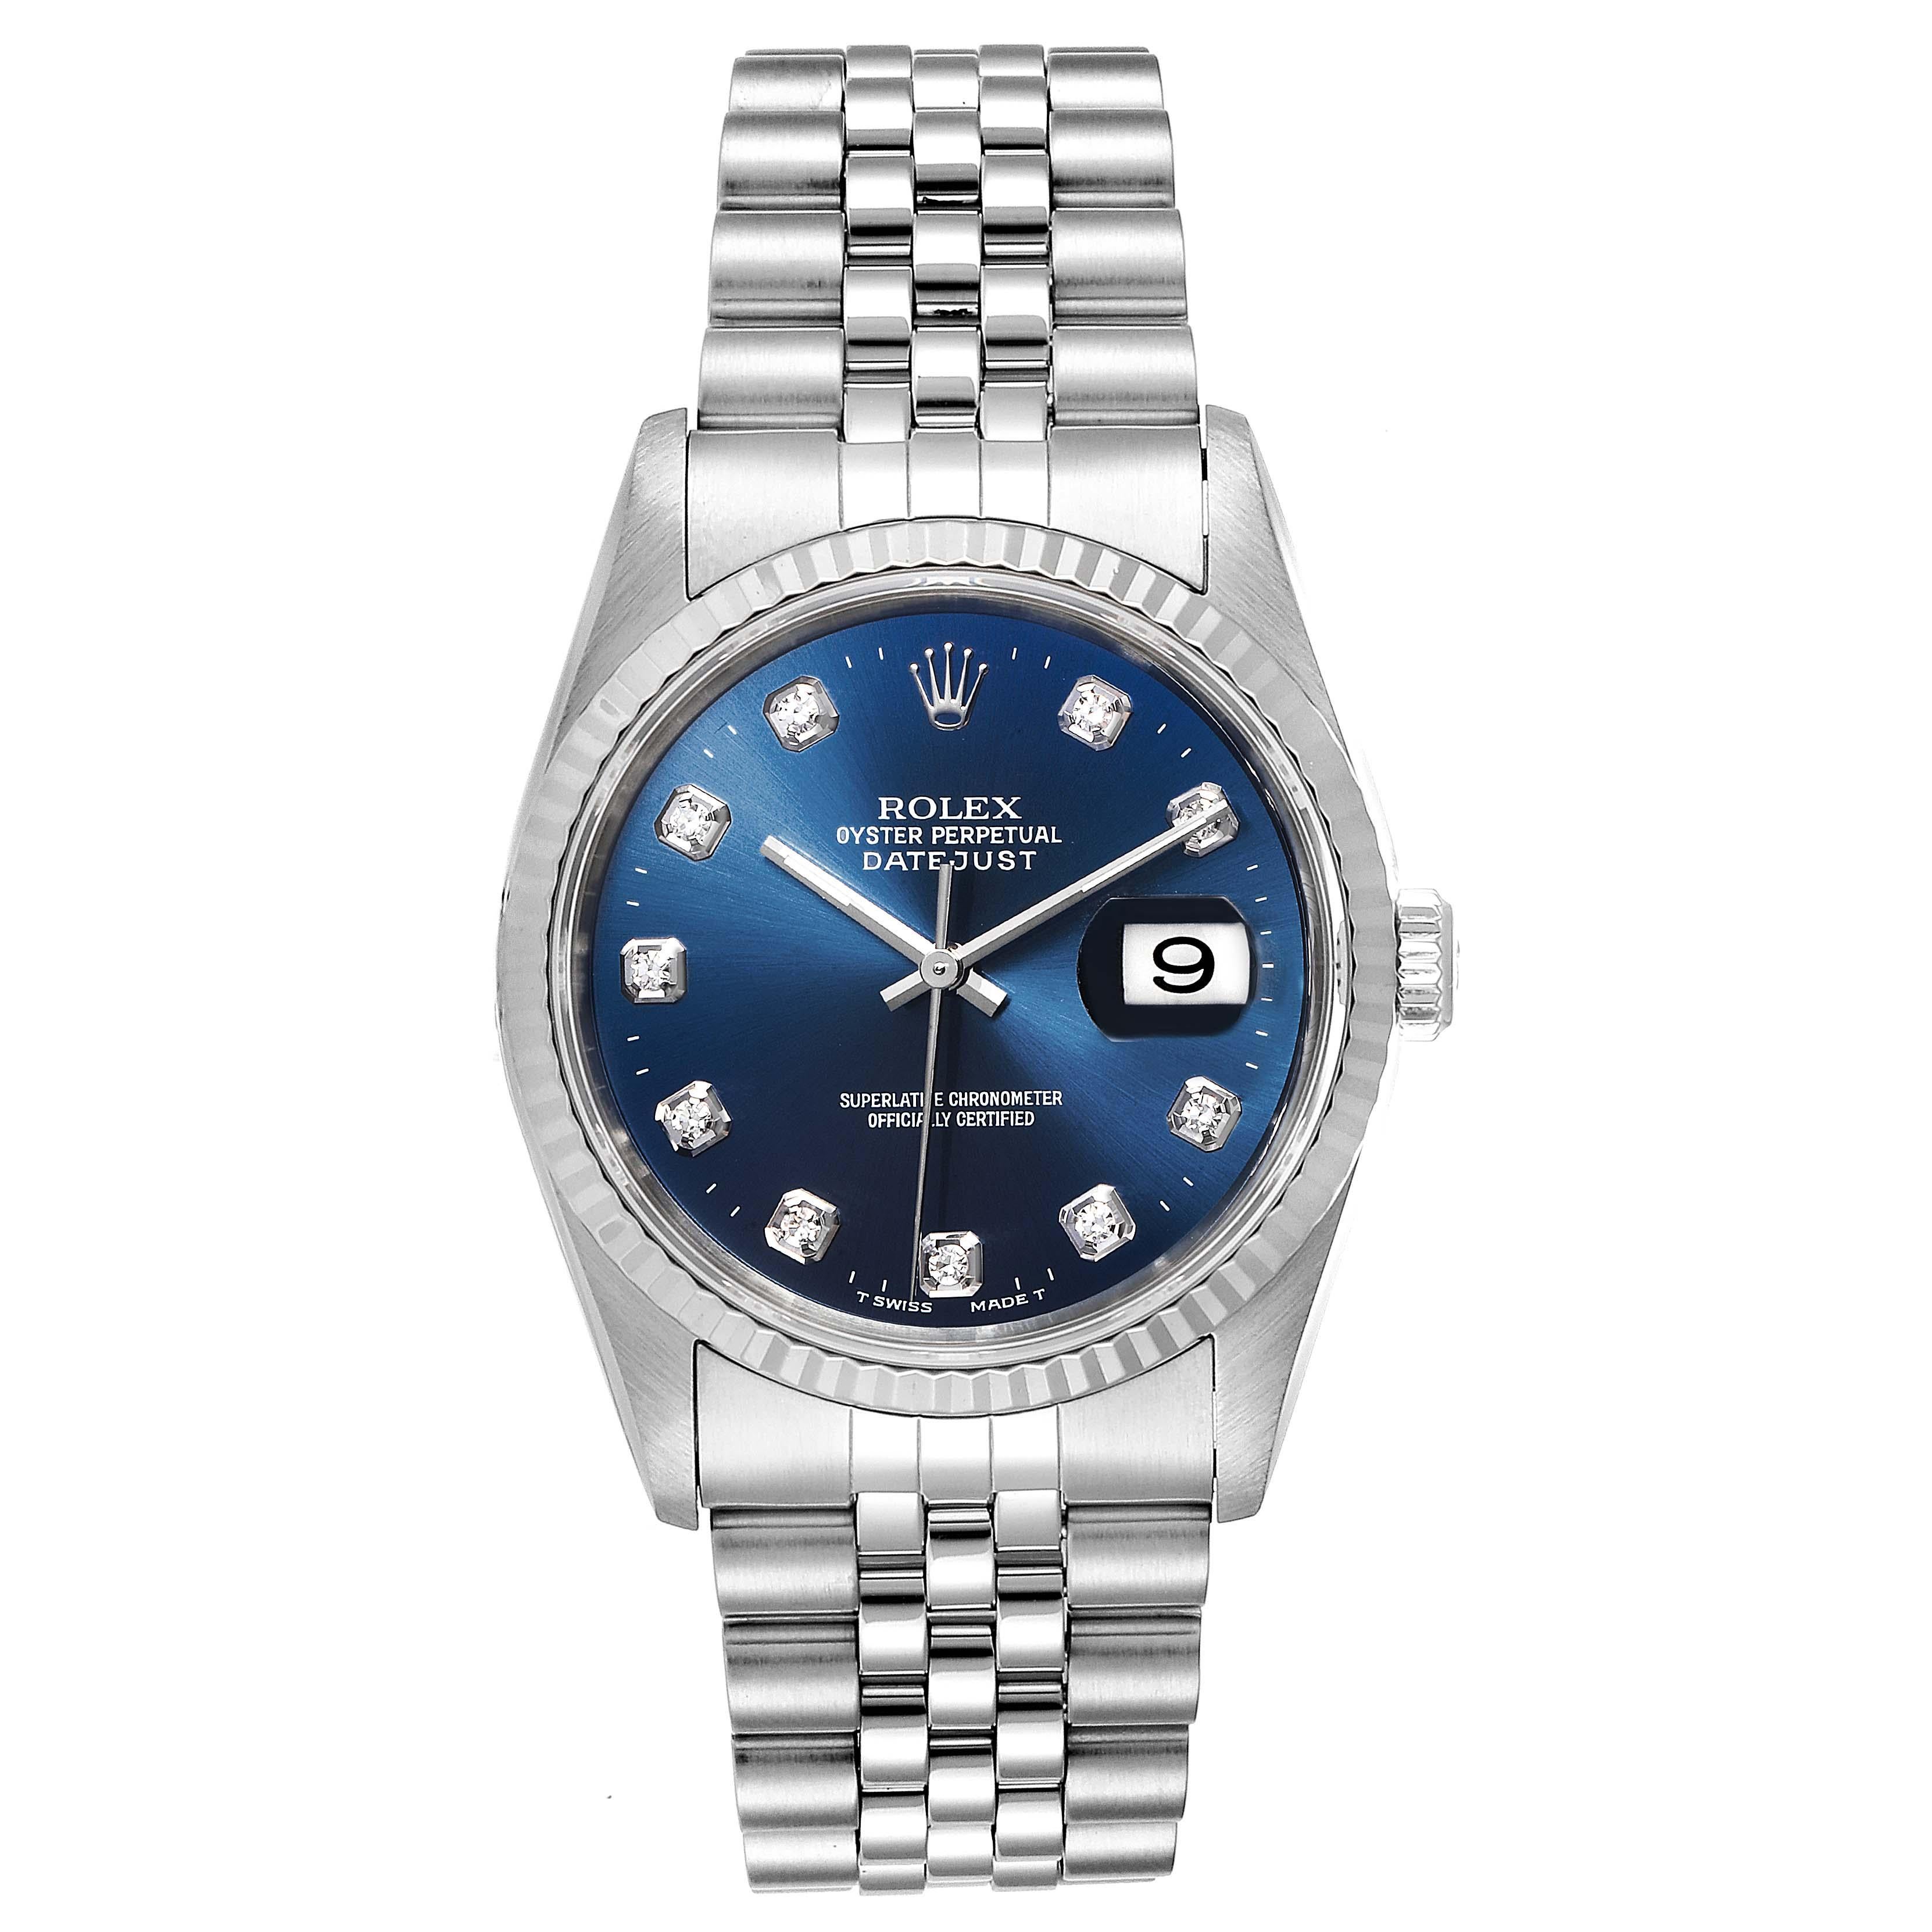 Rolex Datejust Steel White Gold Blue Diamond Dial Mens Watch 16234. Officially certified chronometer self-winding movement. Stainless steel oyster case 36.0 mm in diameter. Rolex logo on a crown. 18k white gold fluted bezel. Scratch resistant